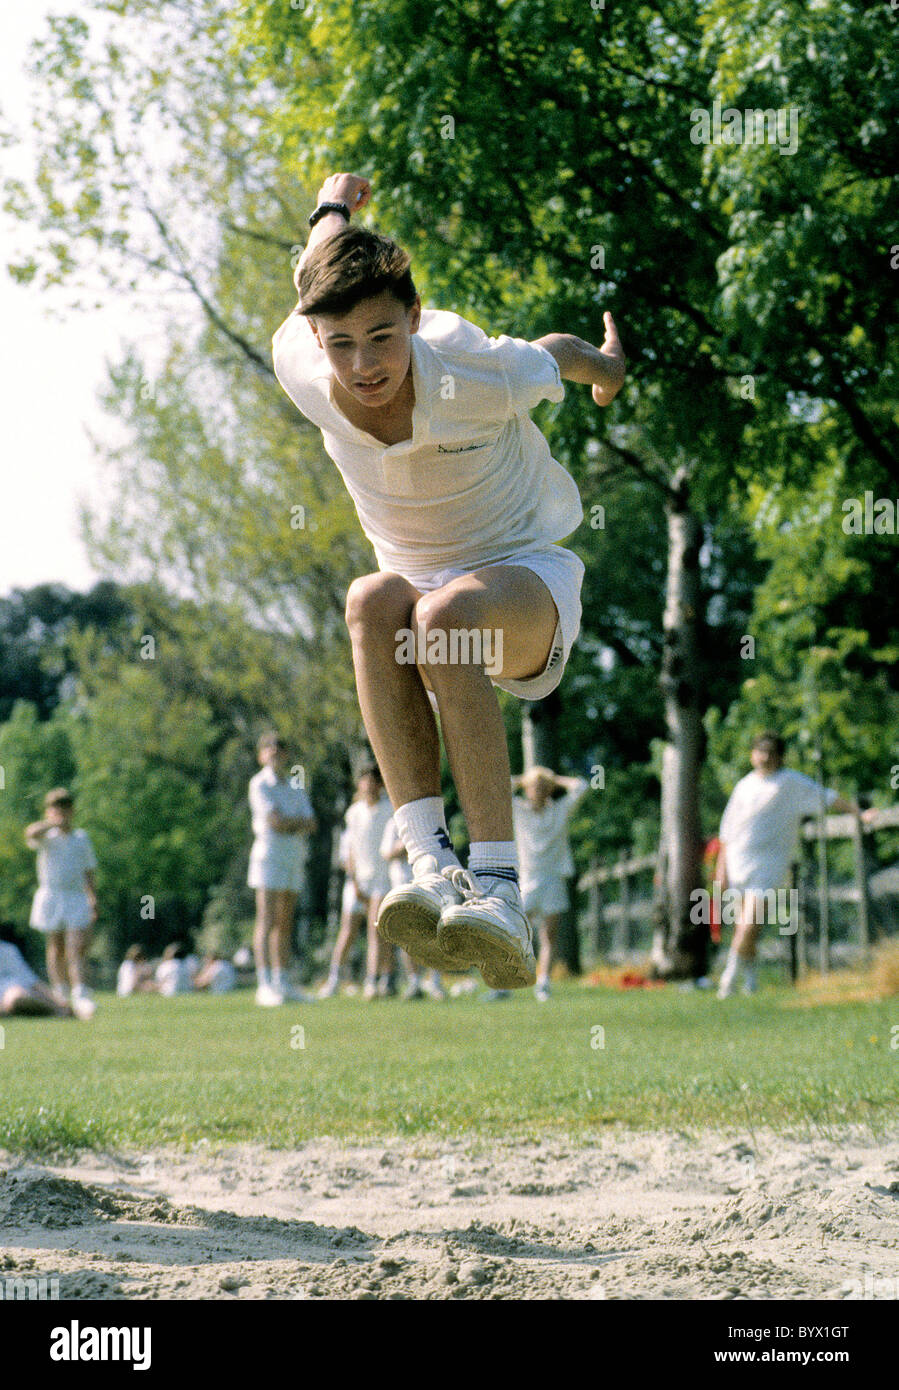 A boy jumping during school sports day Stock Photo